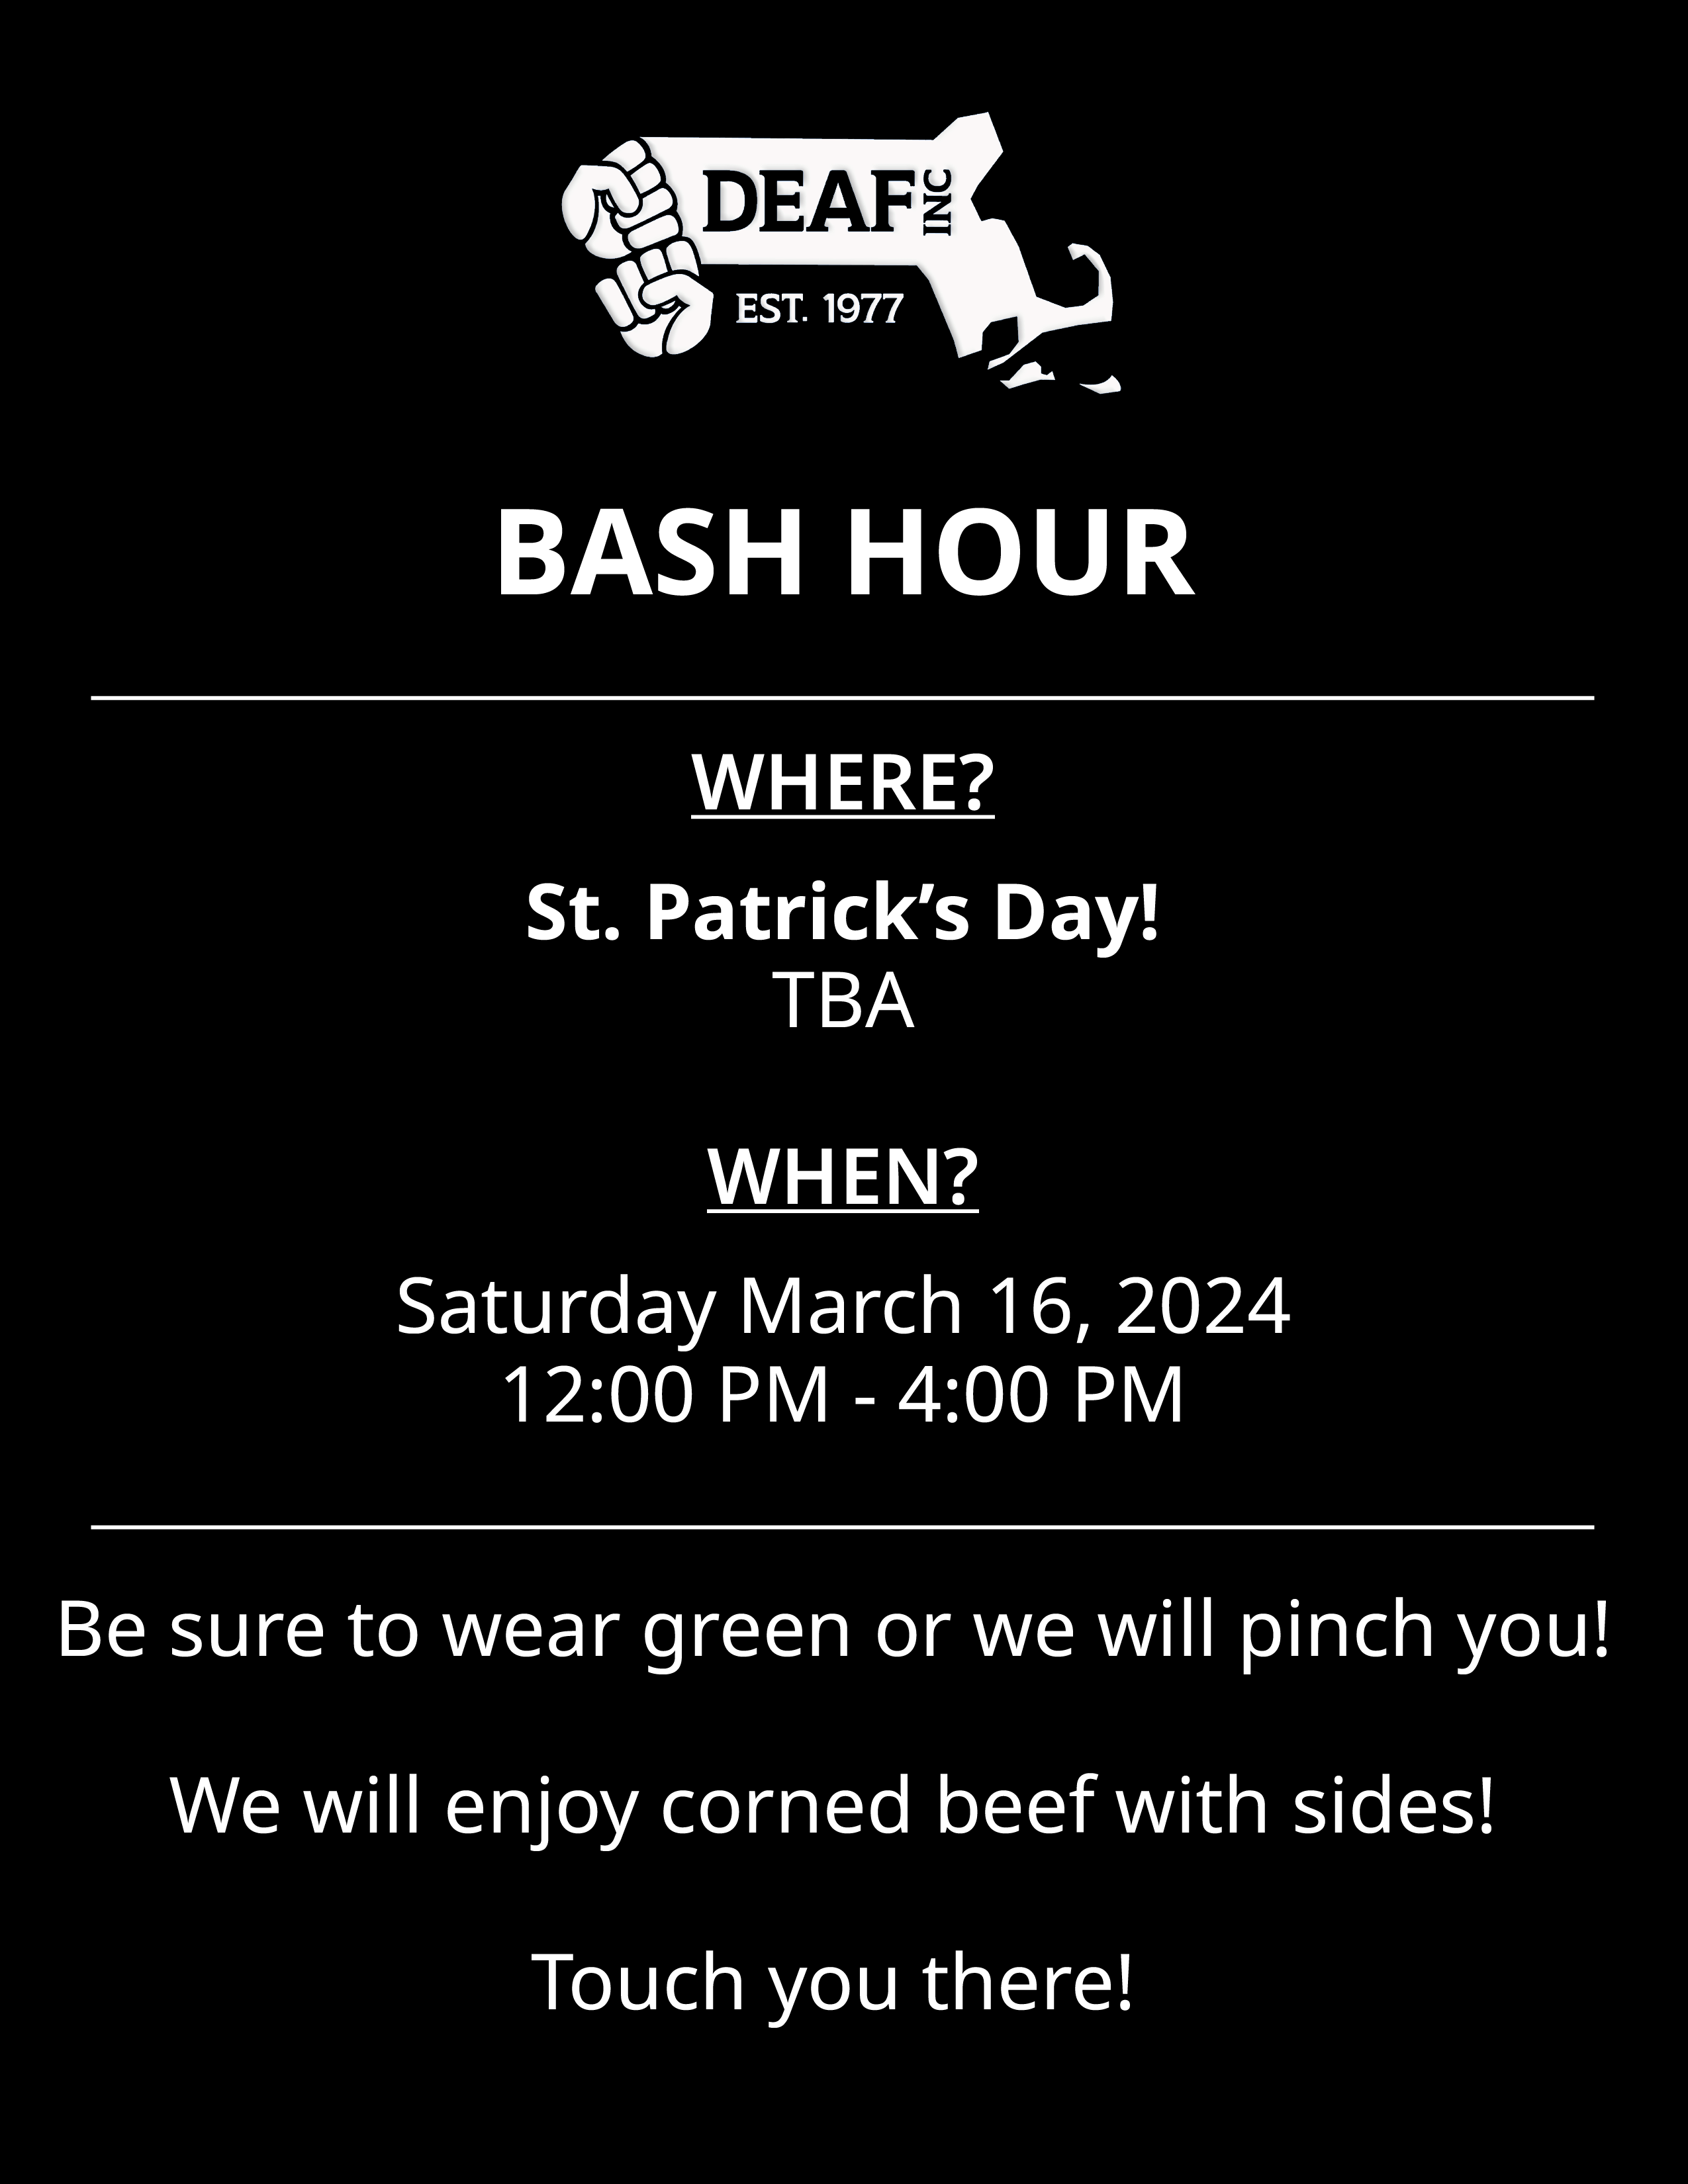 Image description: A black and white flyer with white DEAF, Inc. “BASH HOUR” with a thin white divider line below. “WHERE? St. Patrick’s Day! TBA. WHEN? Saturday, March 16, 2024. 12:00 PM - 4:00 PM.” thin white divider line below that. “Be sure to wear green or we will pinch you! We will enjoy corned beef with sides! Touch you there!” at the bottom.